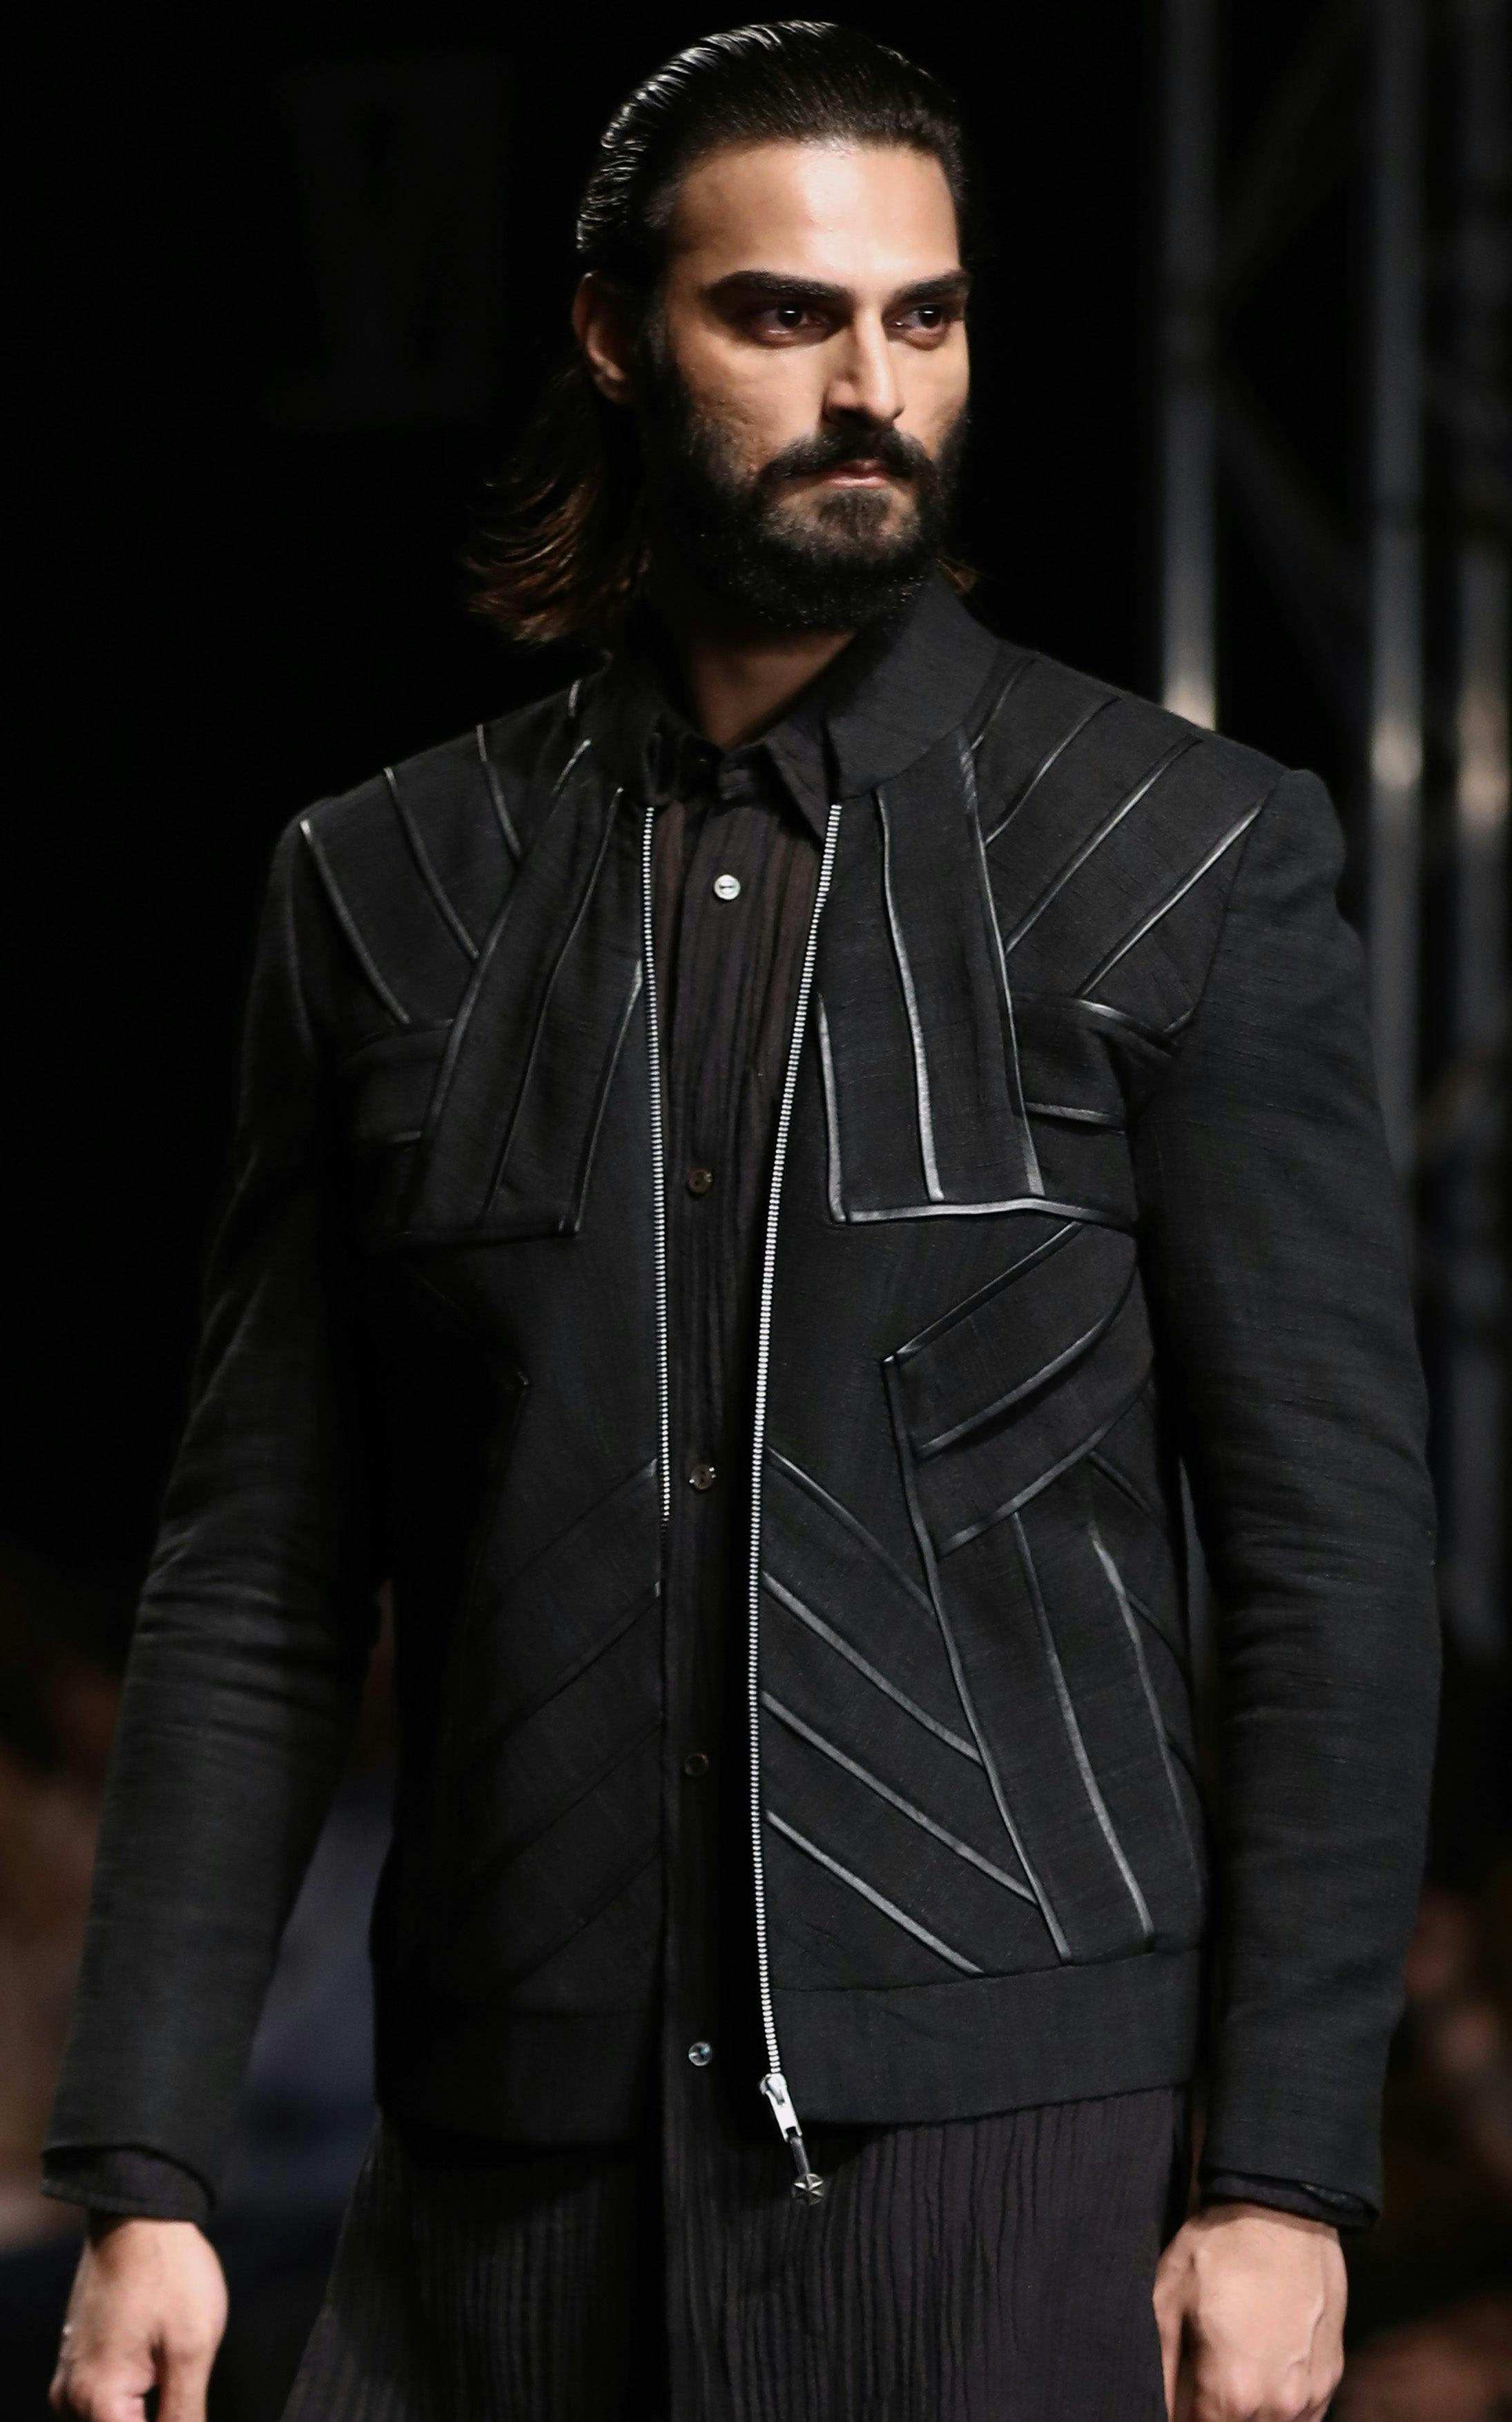 Avenger Star Jacket, a product by Country Made